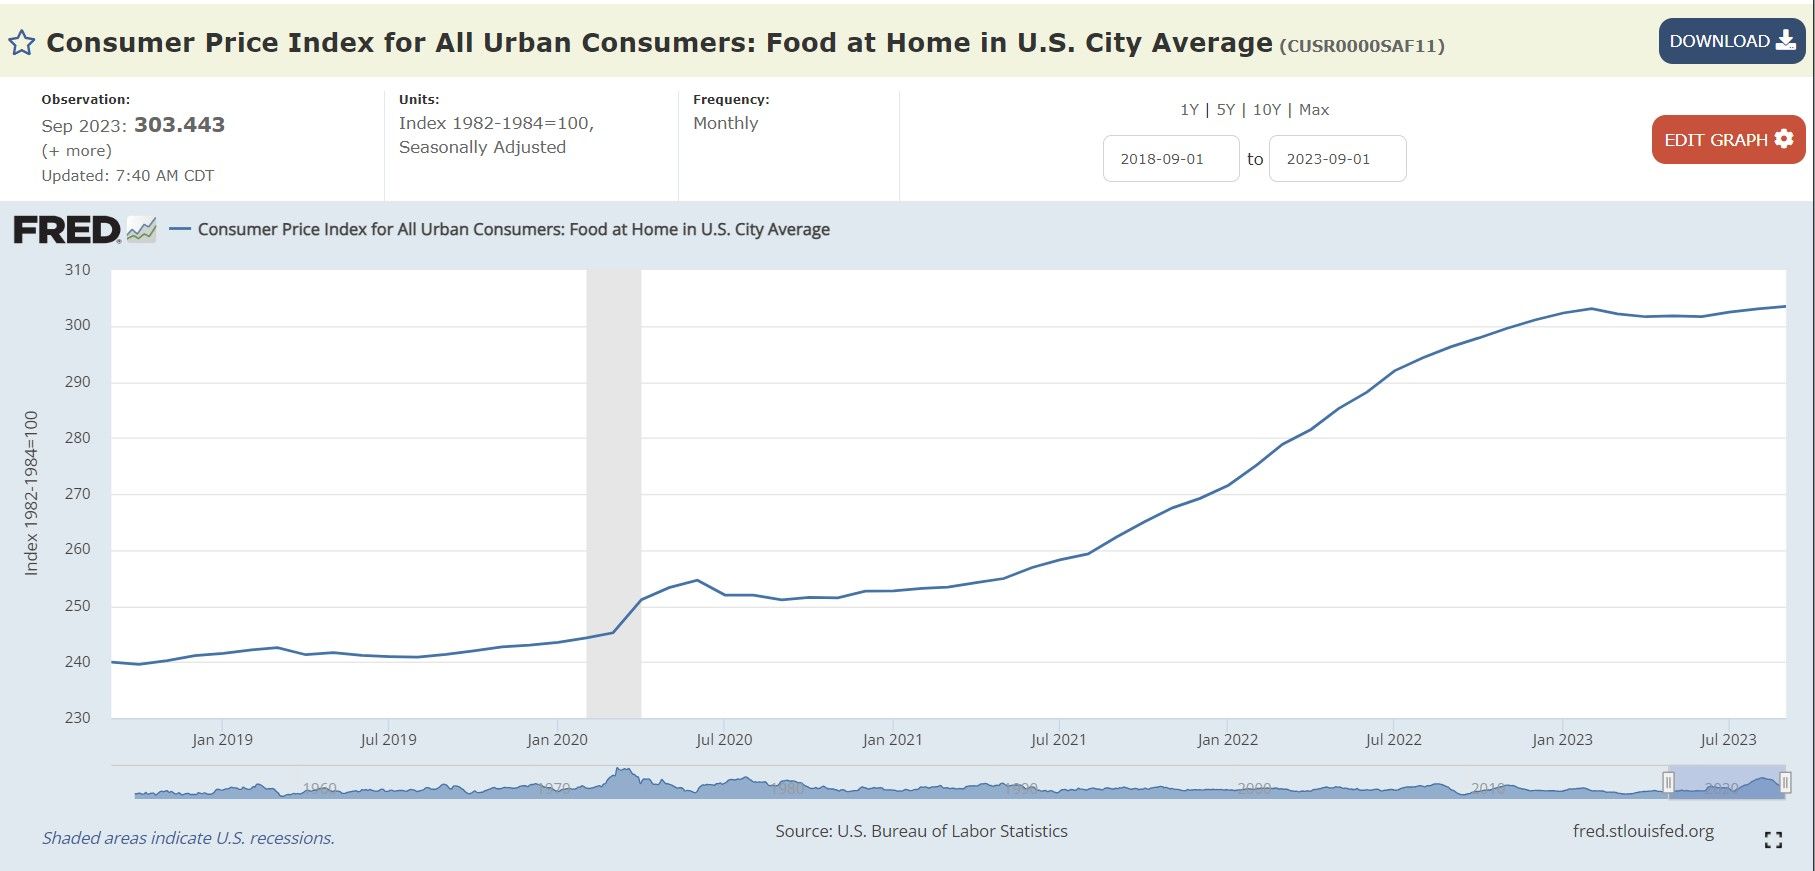 Consumer Price Index for All Urban Consumers: Food at Home